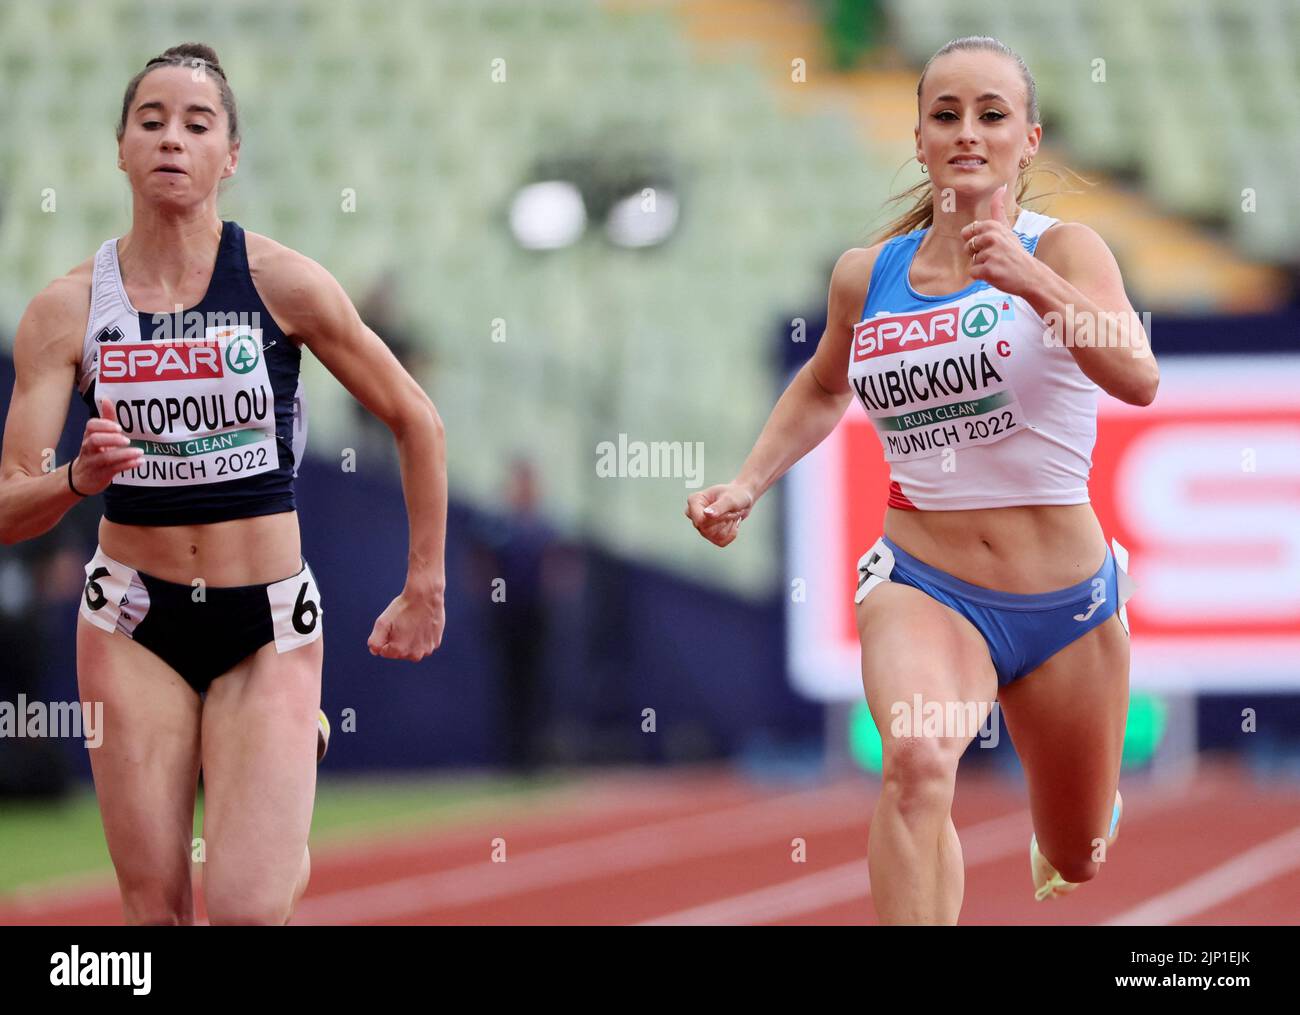 Athletics - 2022 European Championships - Olympiastadion, Munich, Germany - August 15, 2022 Cyprus' Olivia Fotopoulou and Czech Republic's Eva Kubickova in action during the Women's 100m Round 1 - Heats REUTERS/Wolfgang Rattay Stock Photo